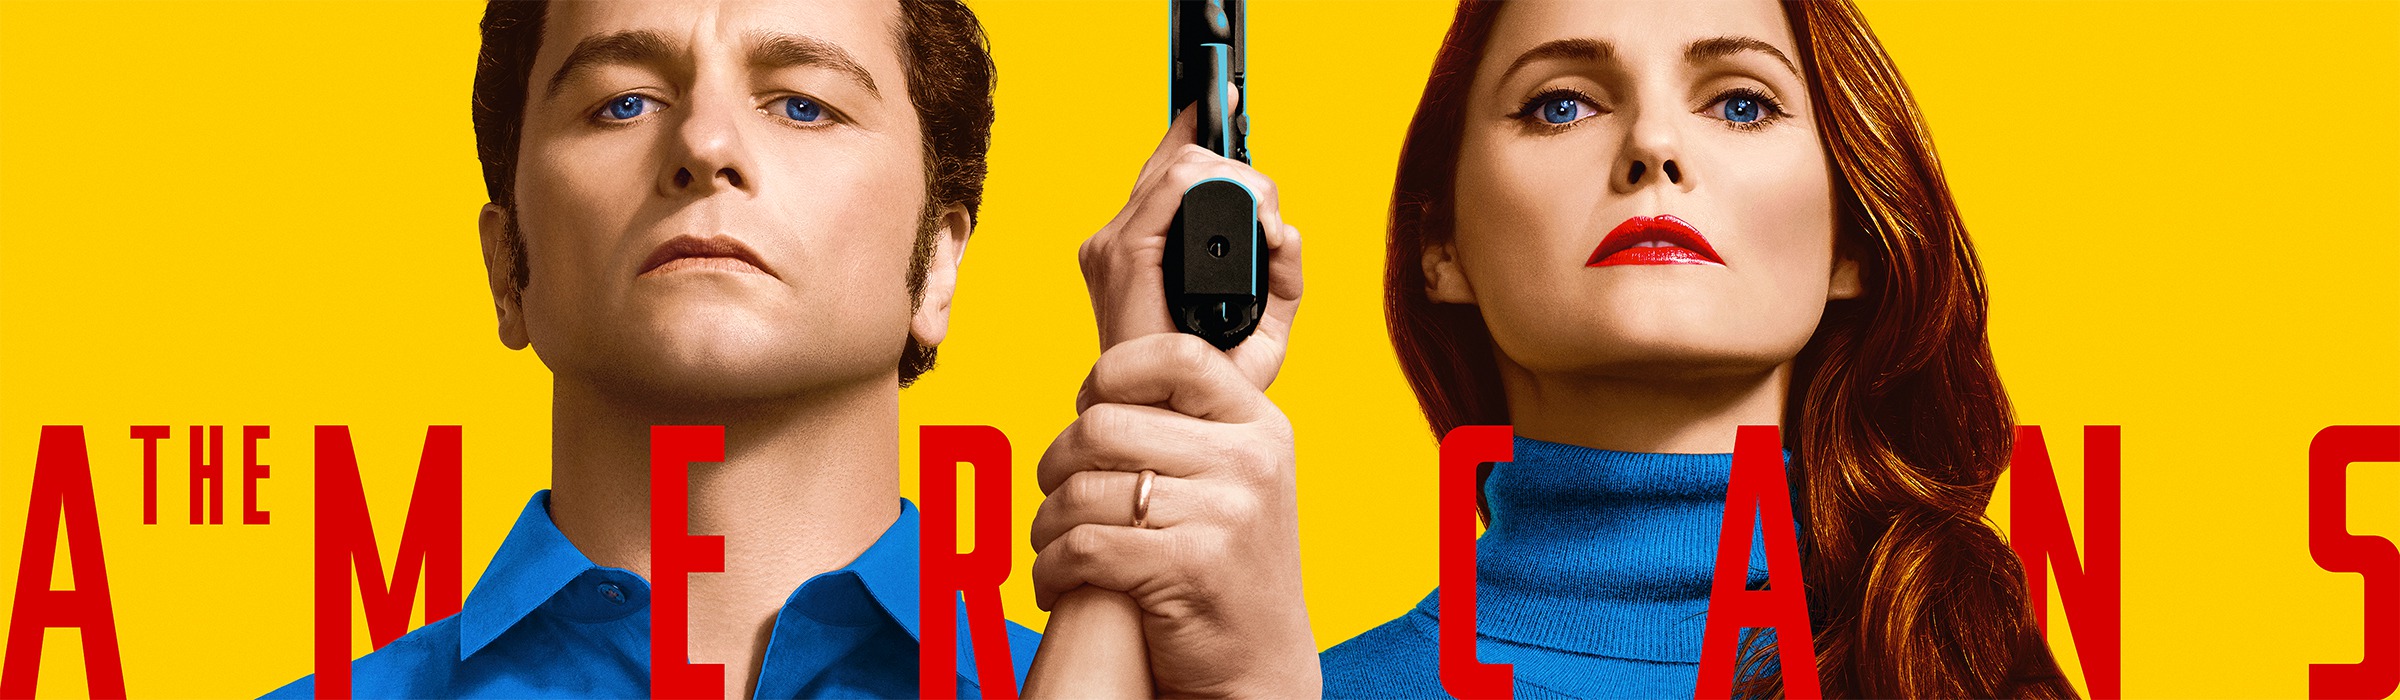 Mega Sized TV Poster Image for The Americans (#15 of 16)